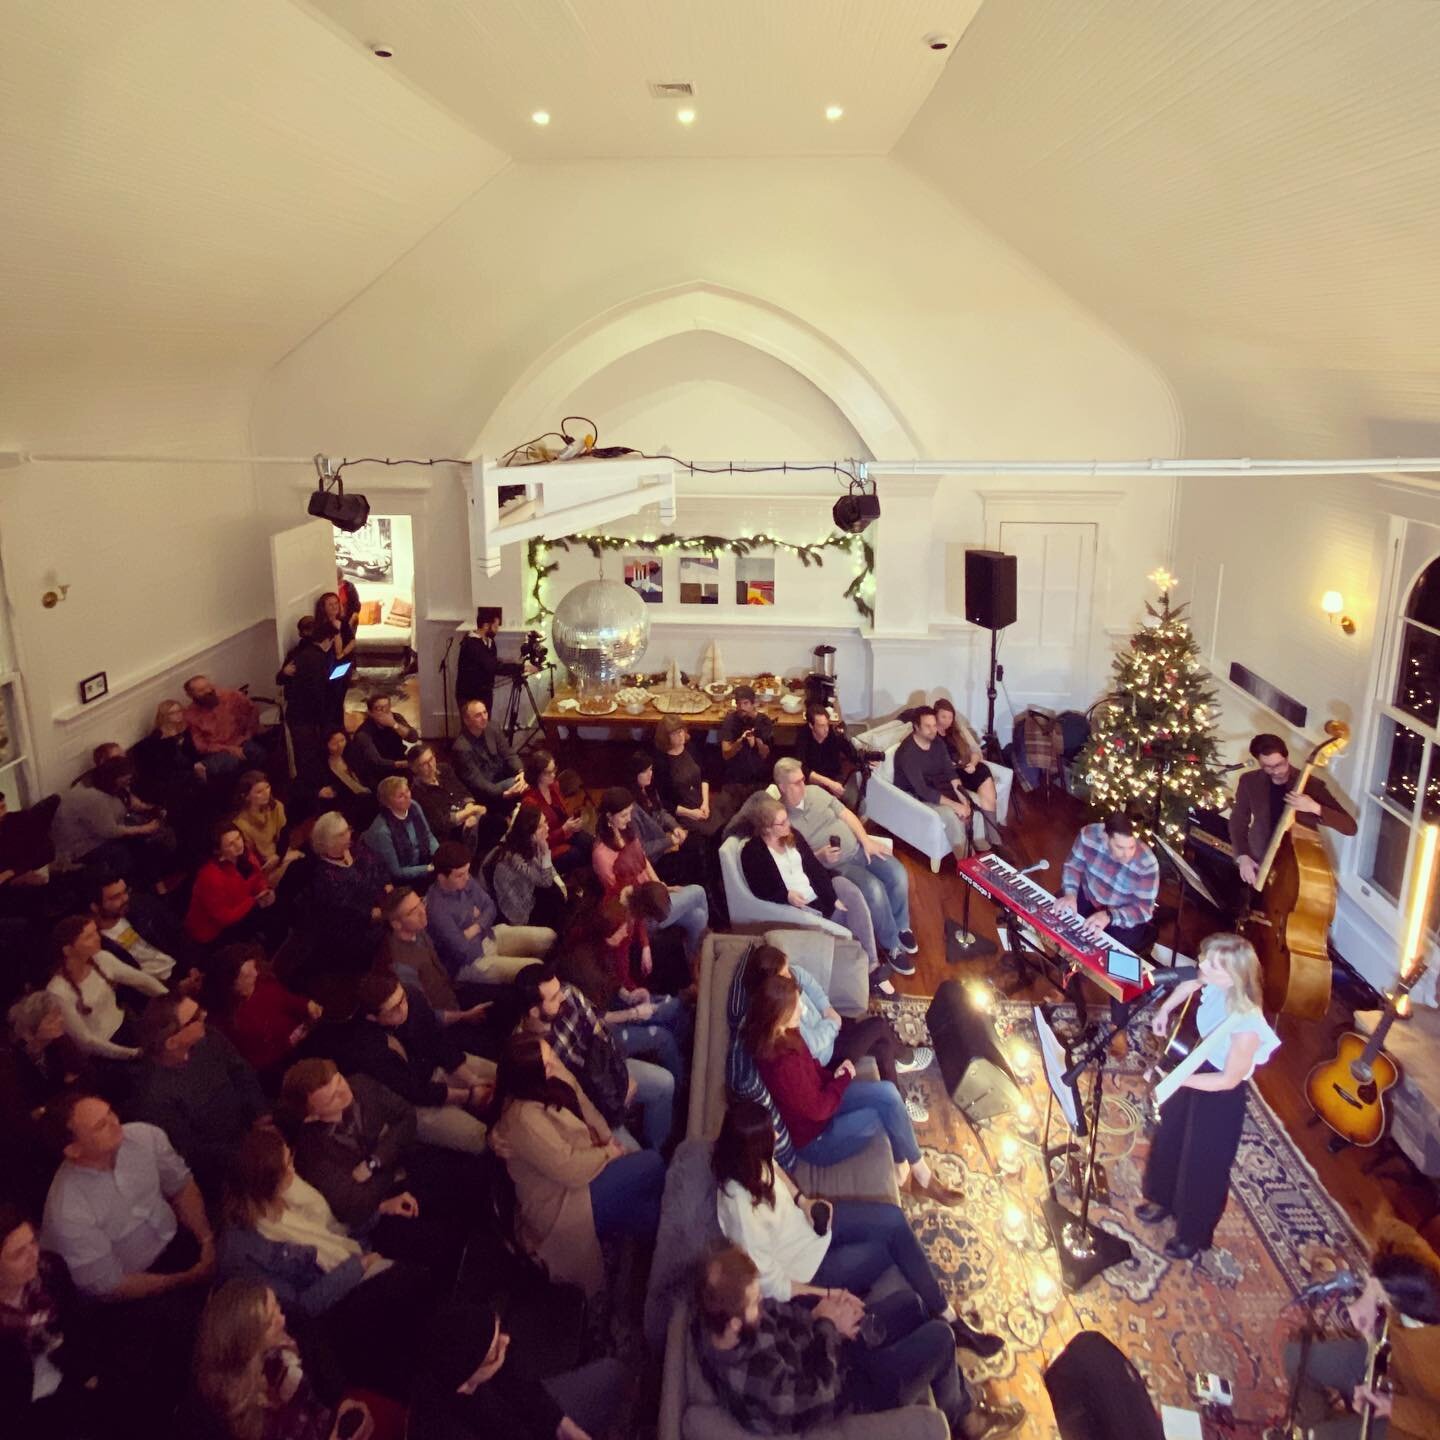 An Art House Christmas! What a beautiful evening ✨🎄 We were packed to the rafters with wonderful humans listening to stunning music. Thank you @sandramccracken &amp; crew for bringing the goodness, &amp; to everyone who came to celebrate with us. Ou